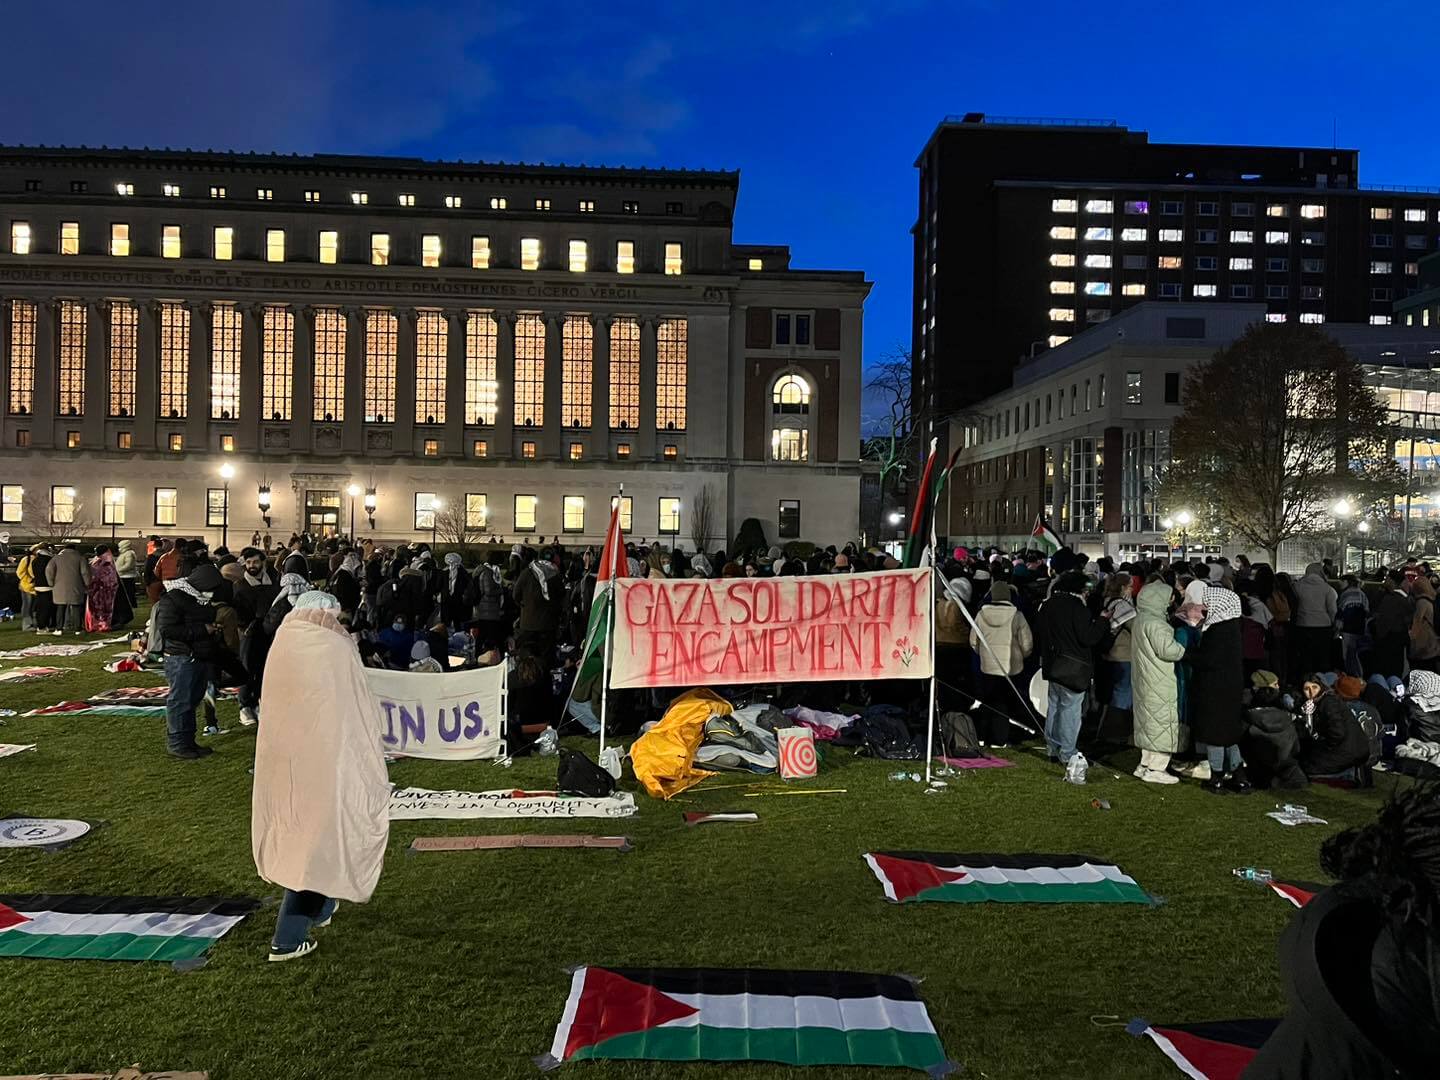 a Columbia student organizer on the Gaza Solidarity Encampment – breaking news